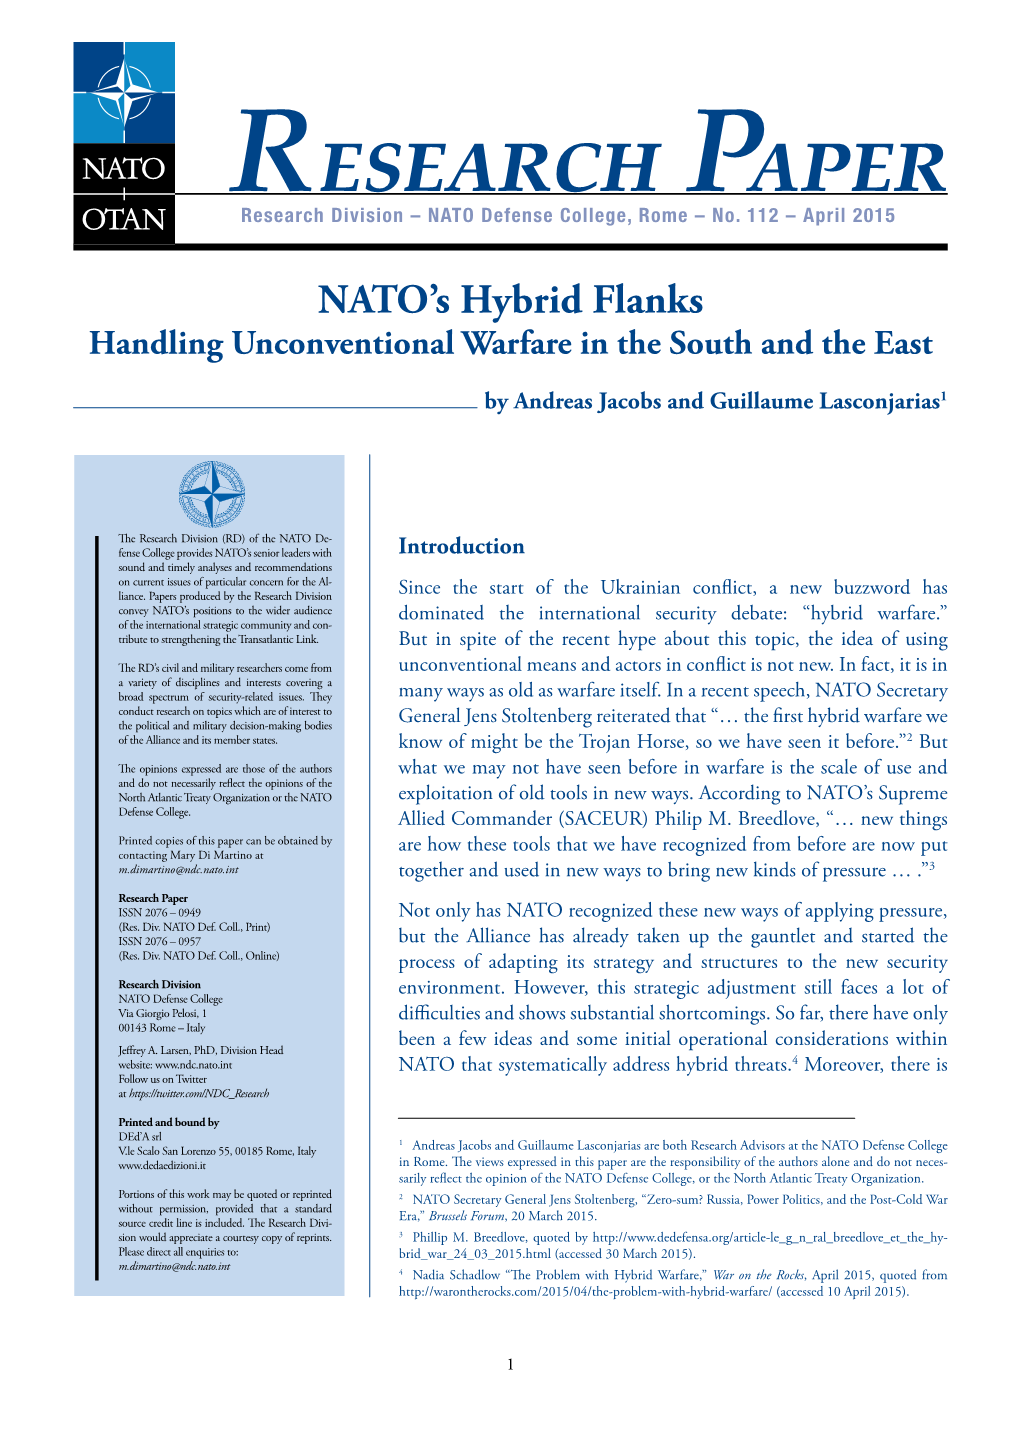 NATO's Hybrid Flanks: Handling Unconventional Warfare in The